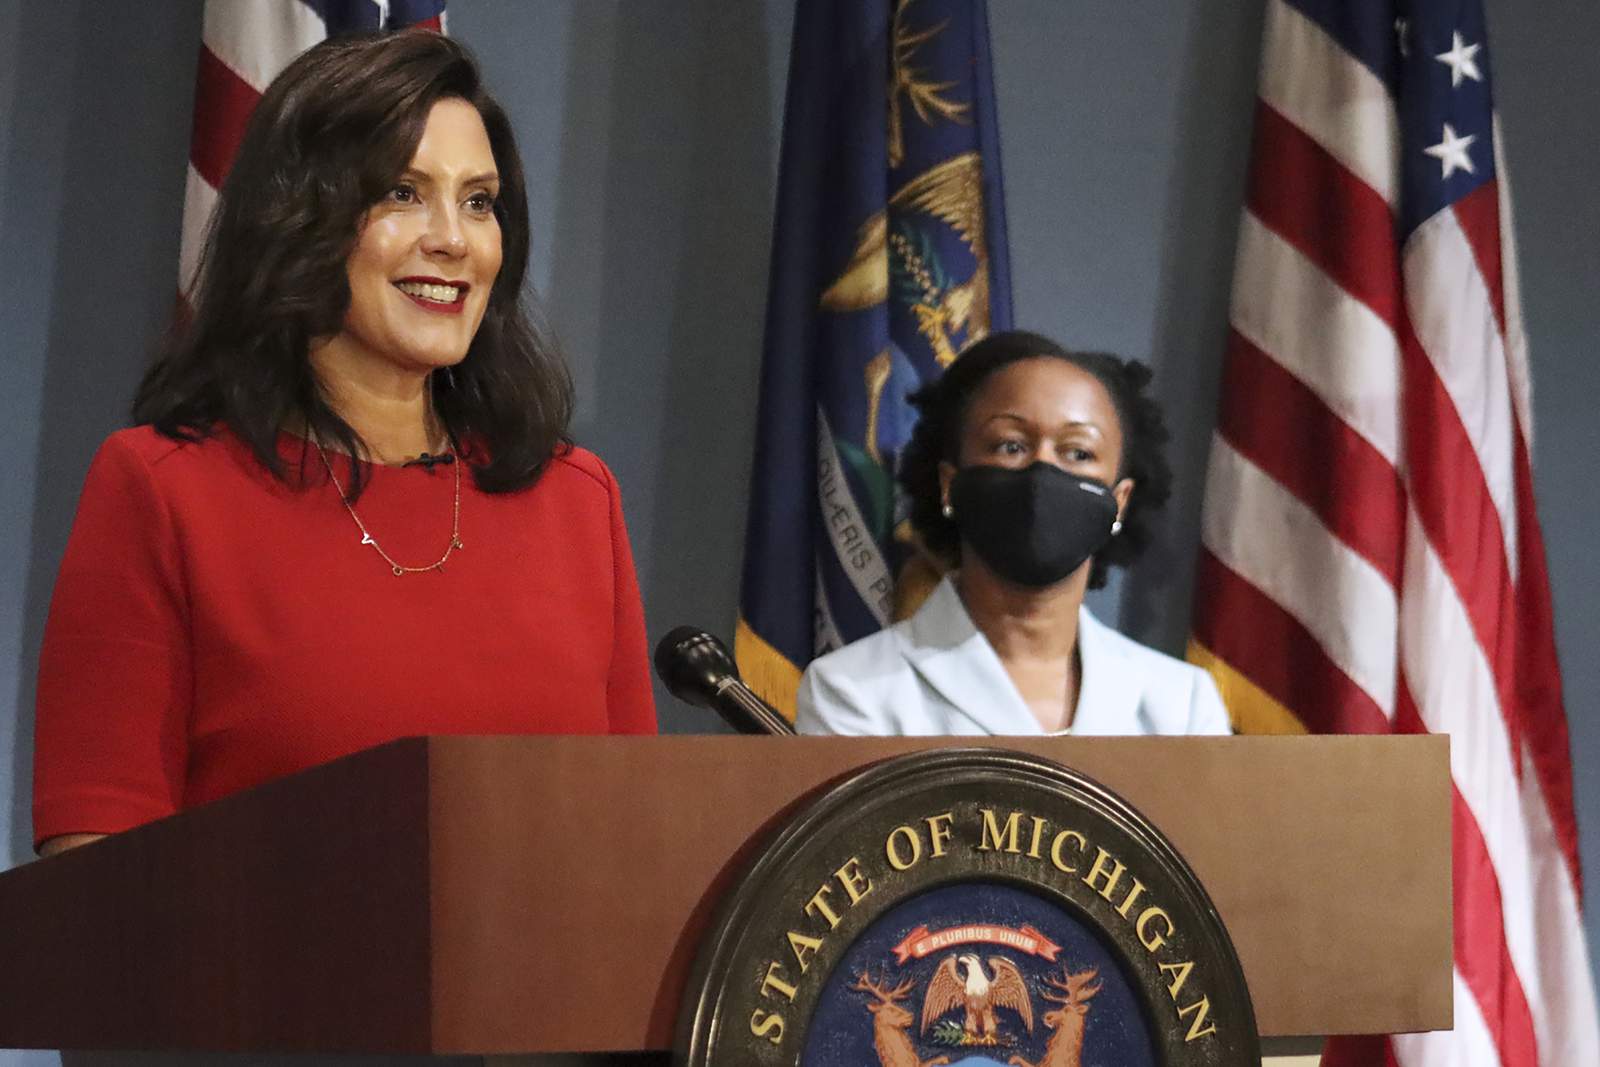 Groups charged in plot to kidnap Gov. Gretchen Whitmer, attack Michigan Capitol